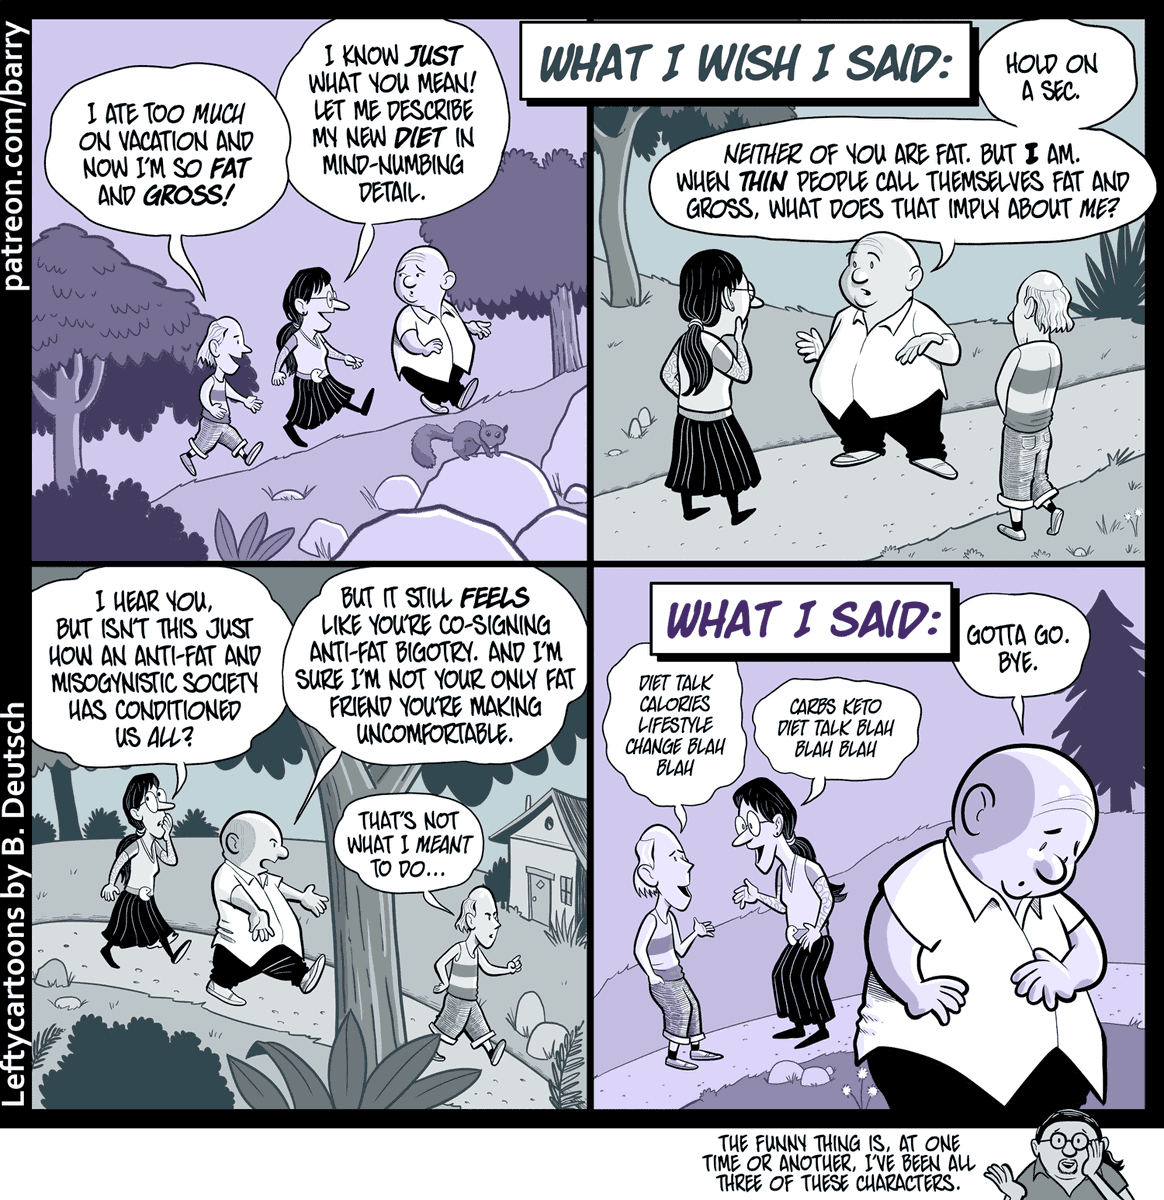 A thread of Fat Acceptance cartoons! What I Wish I'd Said/What I SaidTranscript:  https://www.patreon.com/posts/29224284 Like the cartoons? Support them by retweeting, or by pledging a buck or two at  http://patreon.com/barry .  #FatAcceptance  #PoliCartoon